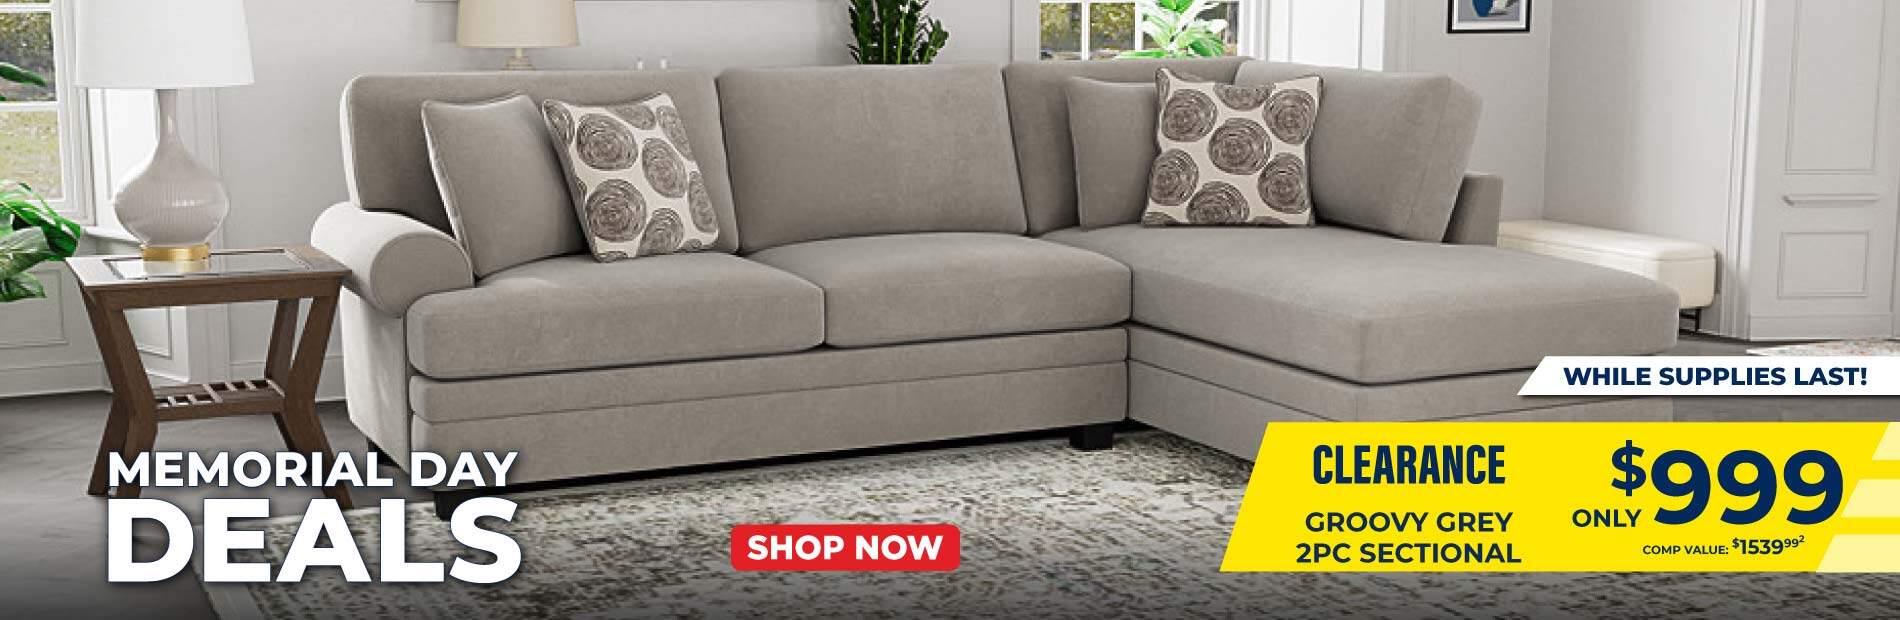 Memorial Day Deals. Clearance! While supplies last.Groovy grey 2PC Sectional only $999.99. Comp Value $1539.99. Shop now.